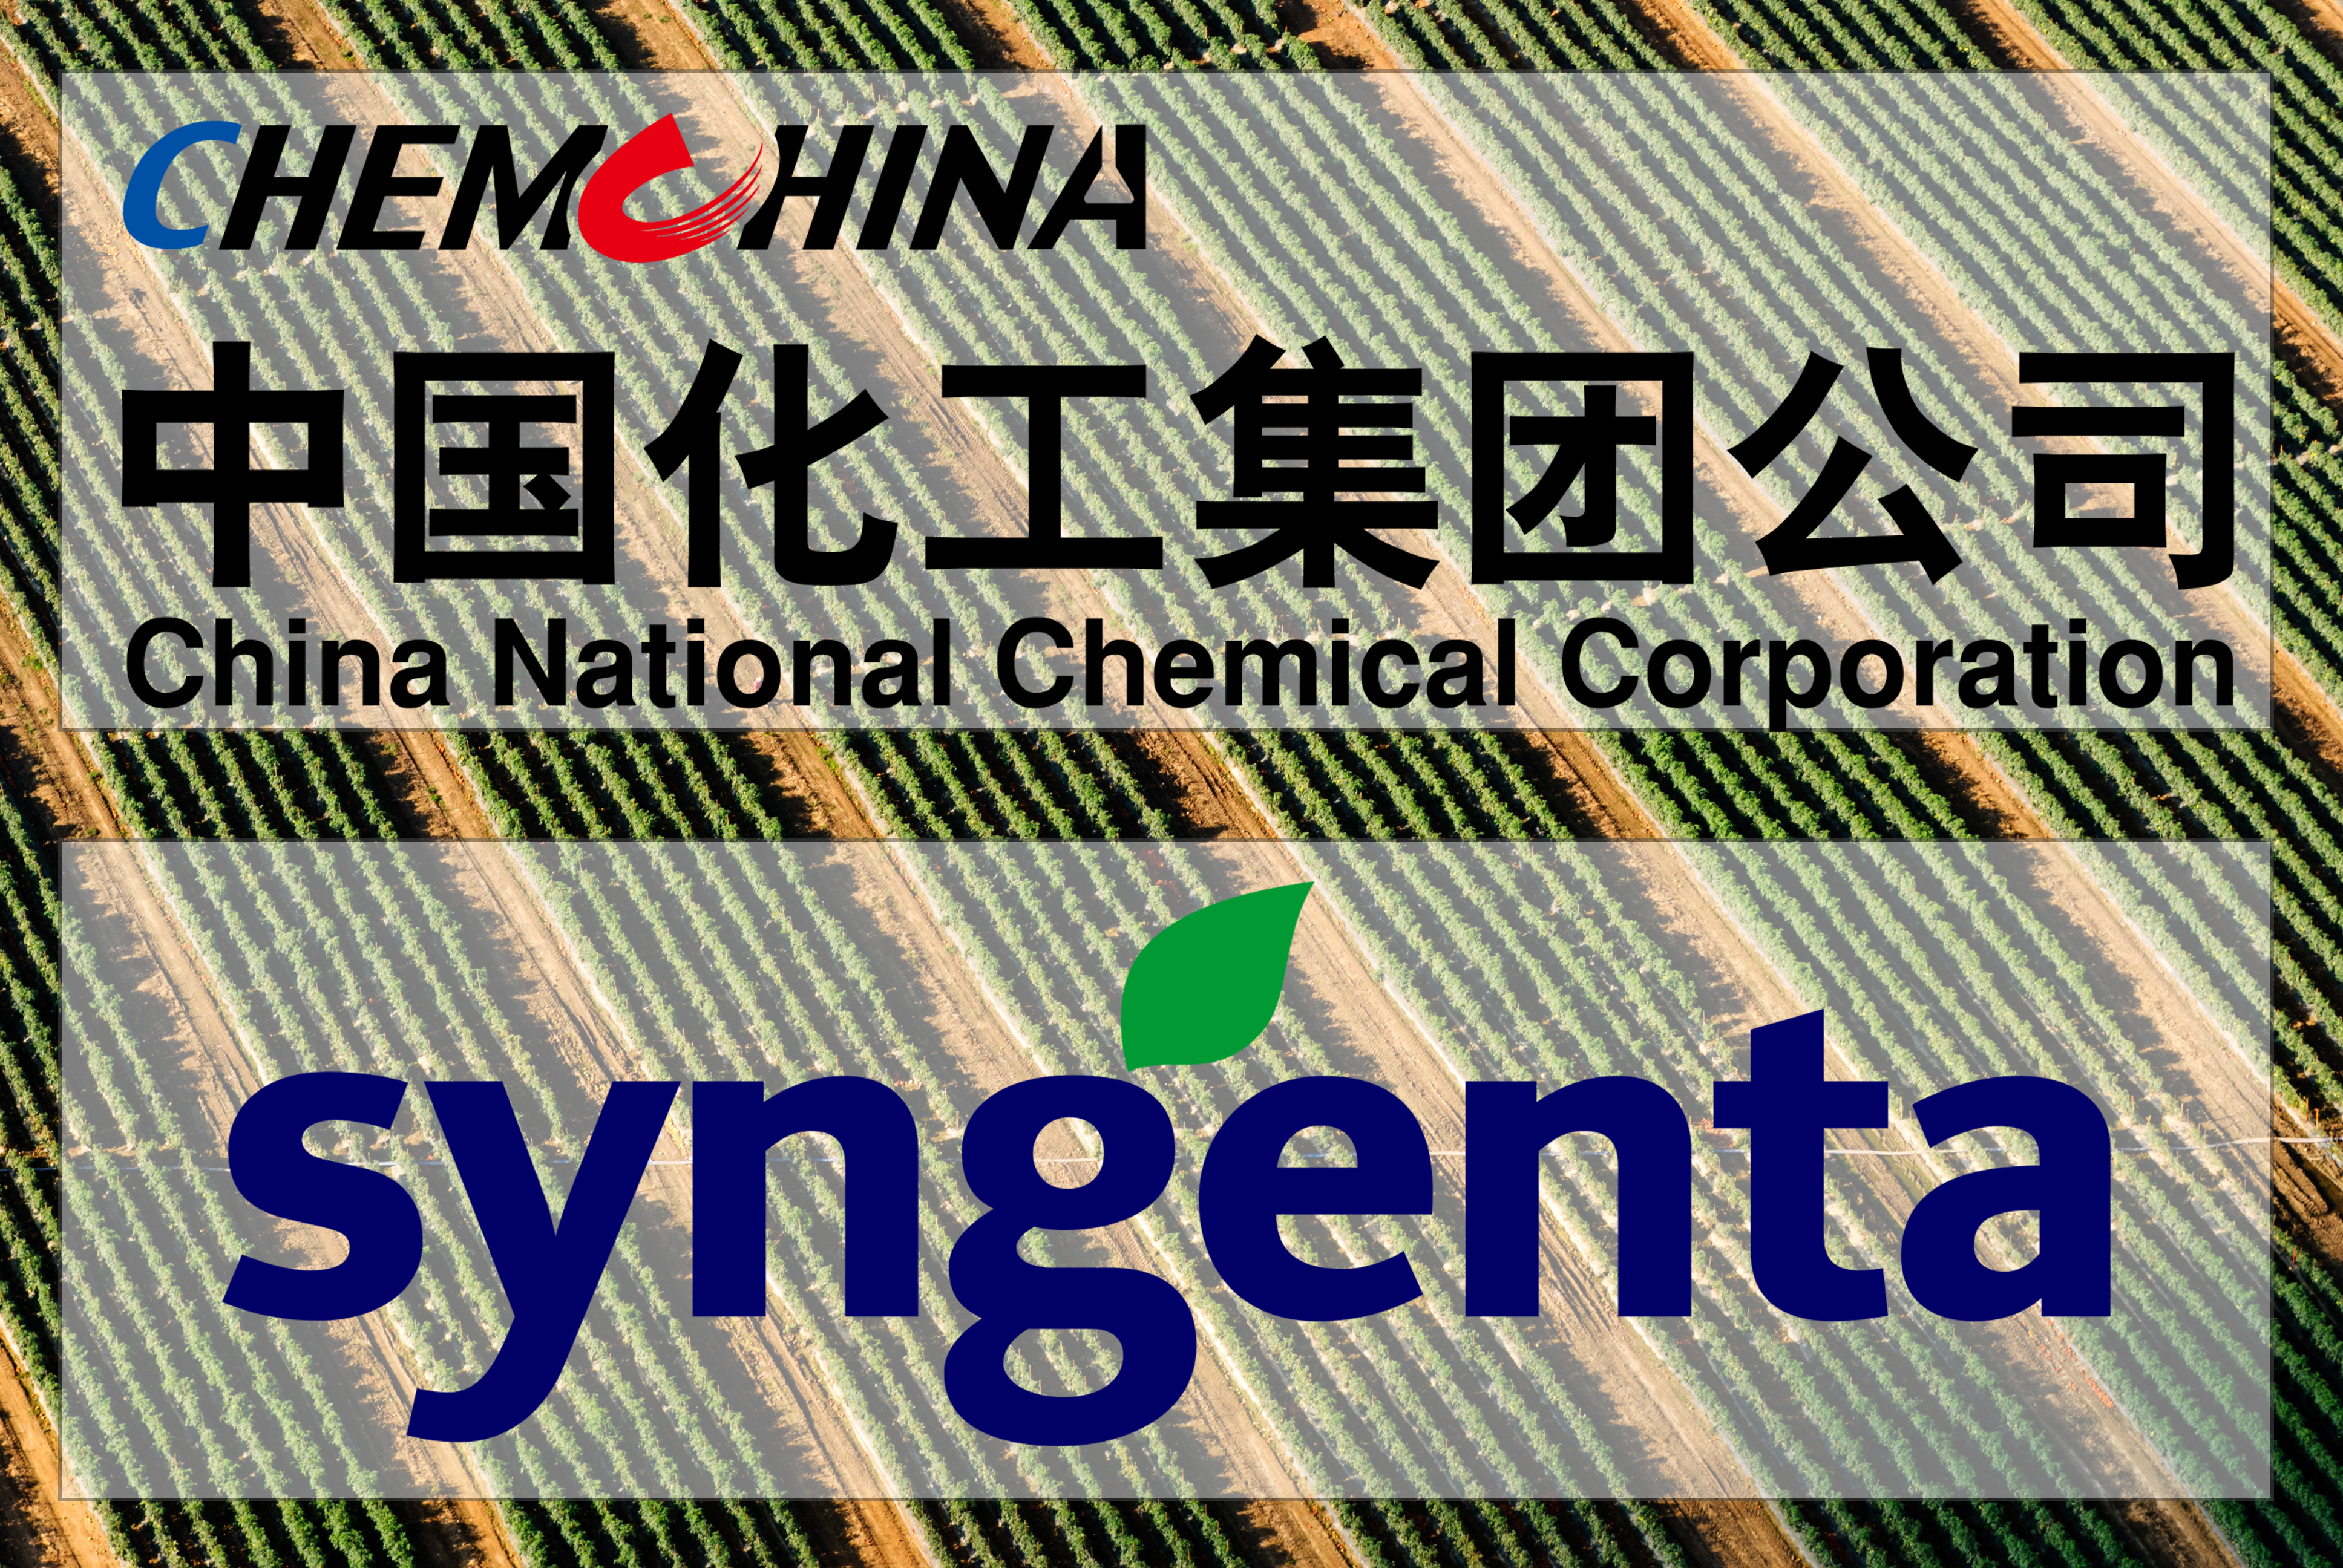 FWW, NFU Appeal to Foreign Investment Oversight Committee to Block ChemChina/Syngenta Acquisition